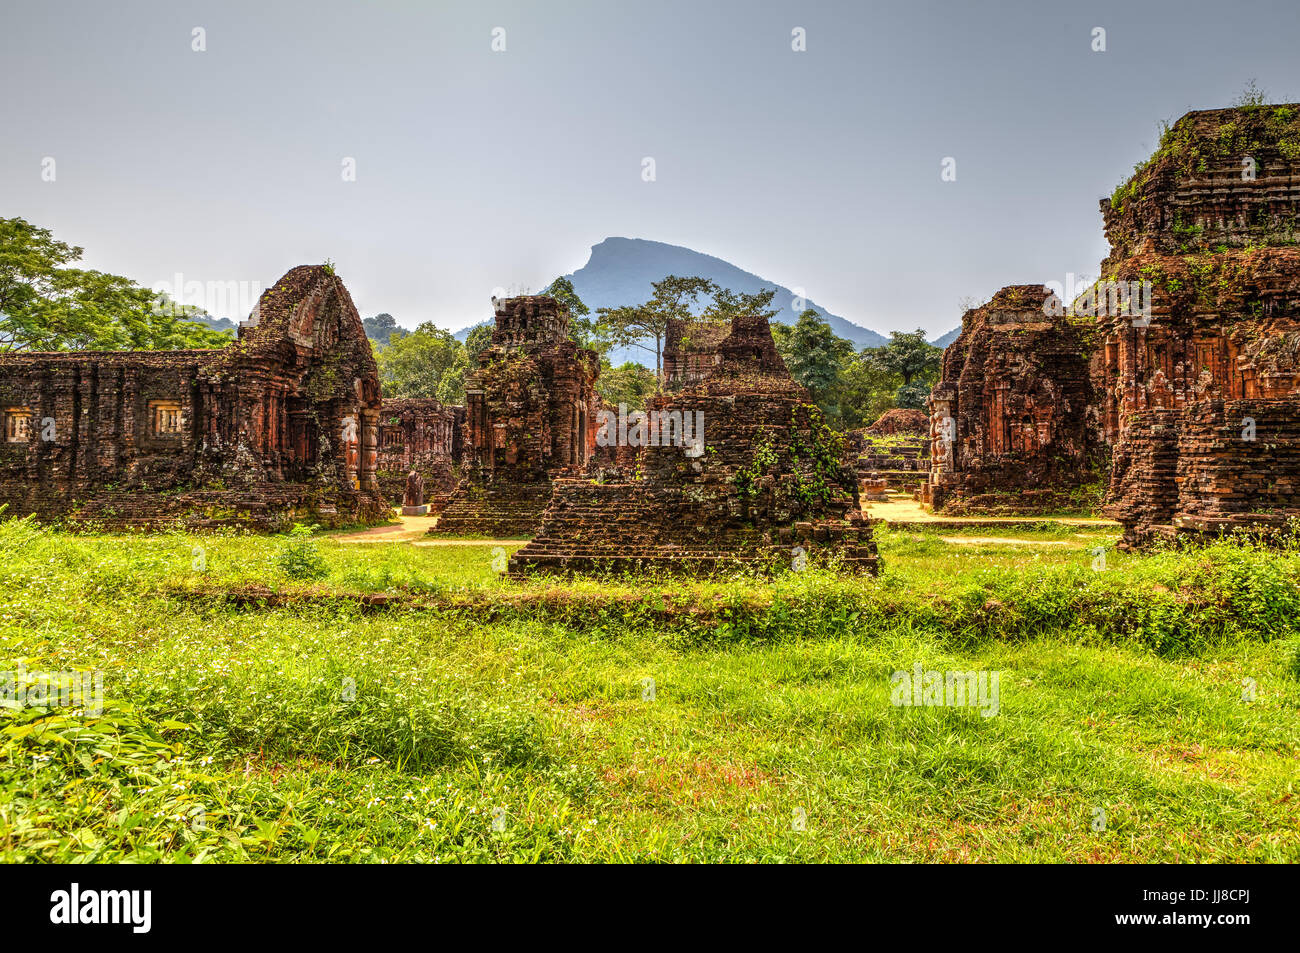 Duy Phu, My Son temple, Vietnam - March 14, 2017: ruins of Hindu temples in the middle of the jungle, UNESCO world heritage site Stock Photo